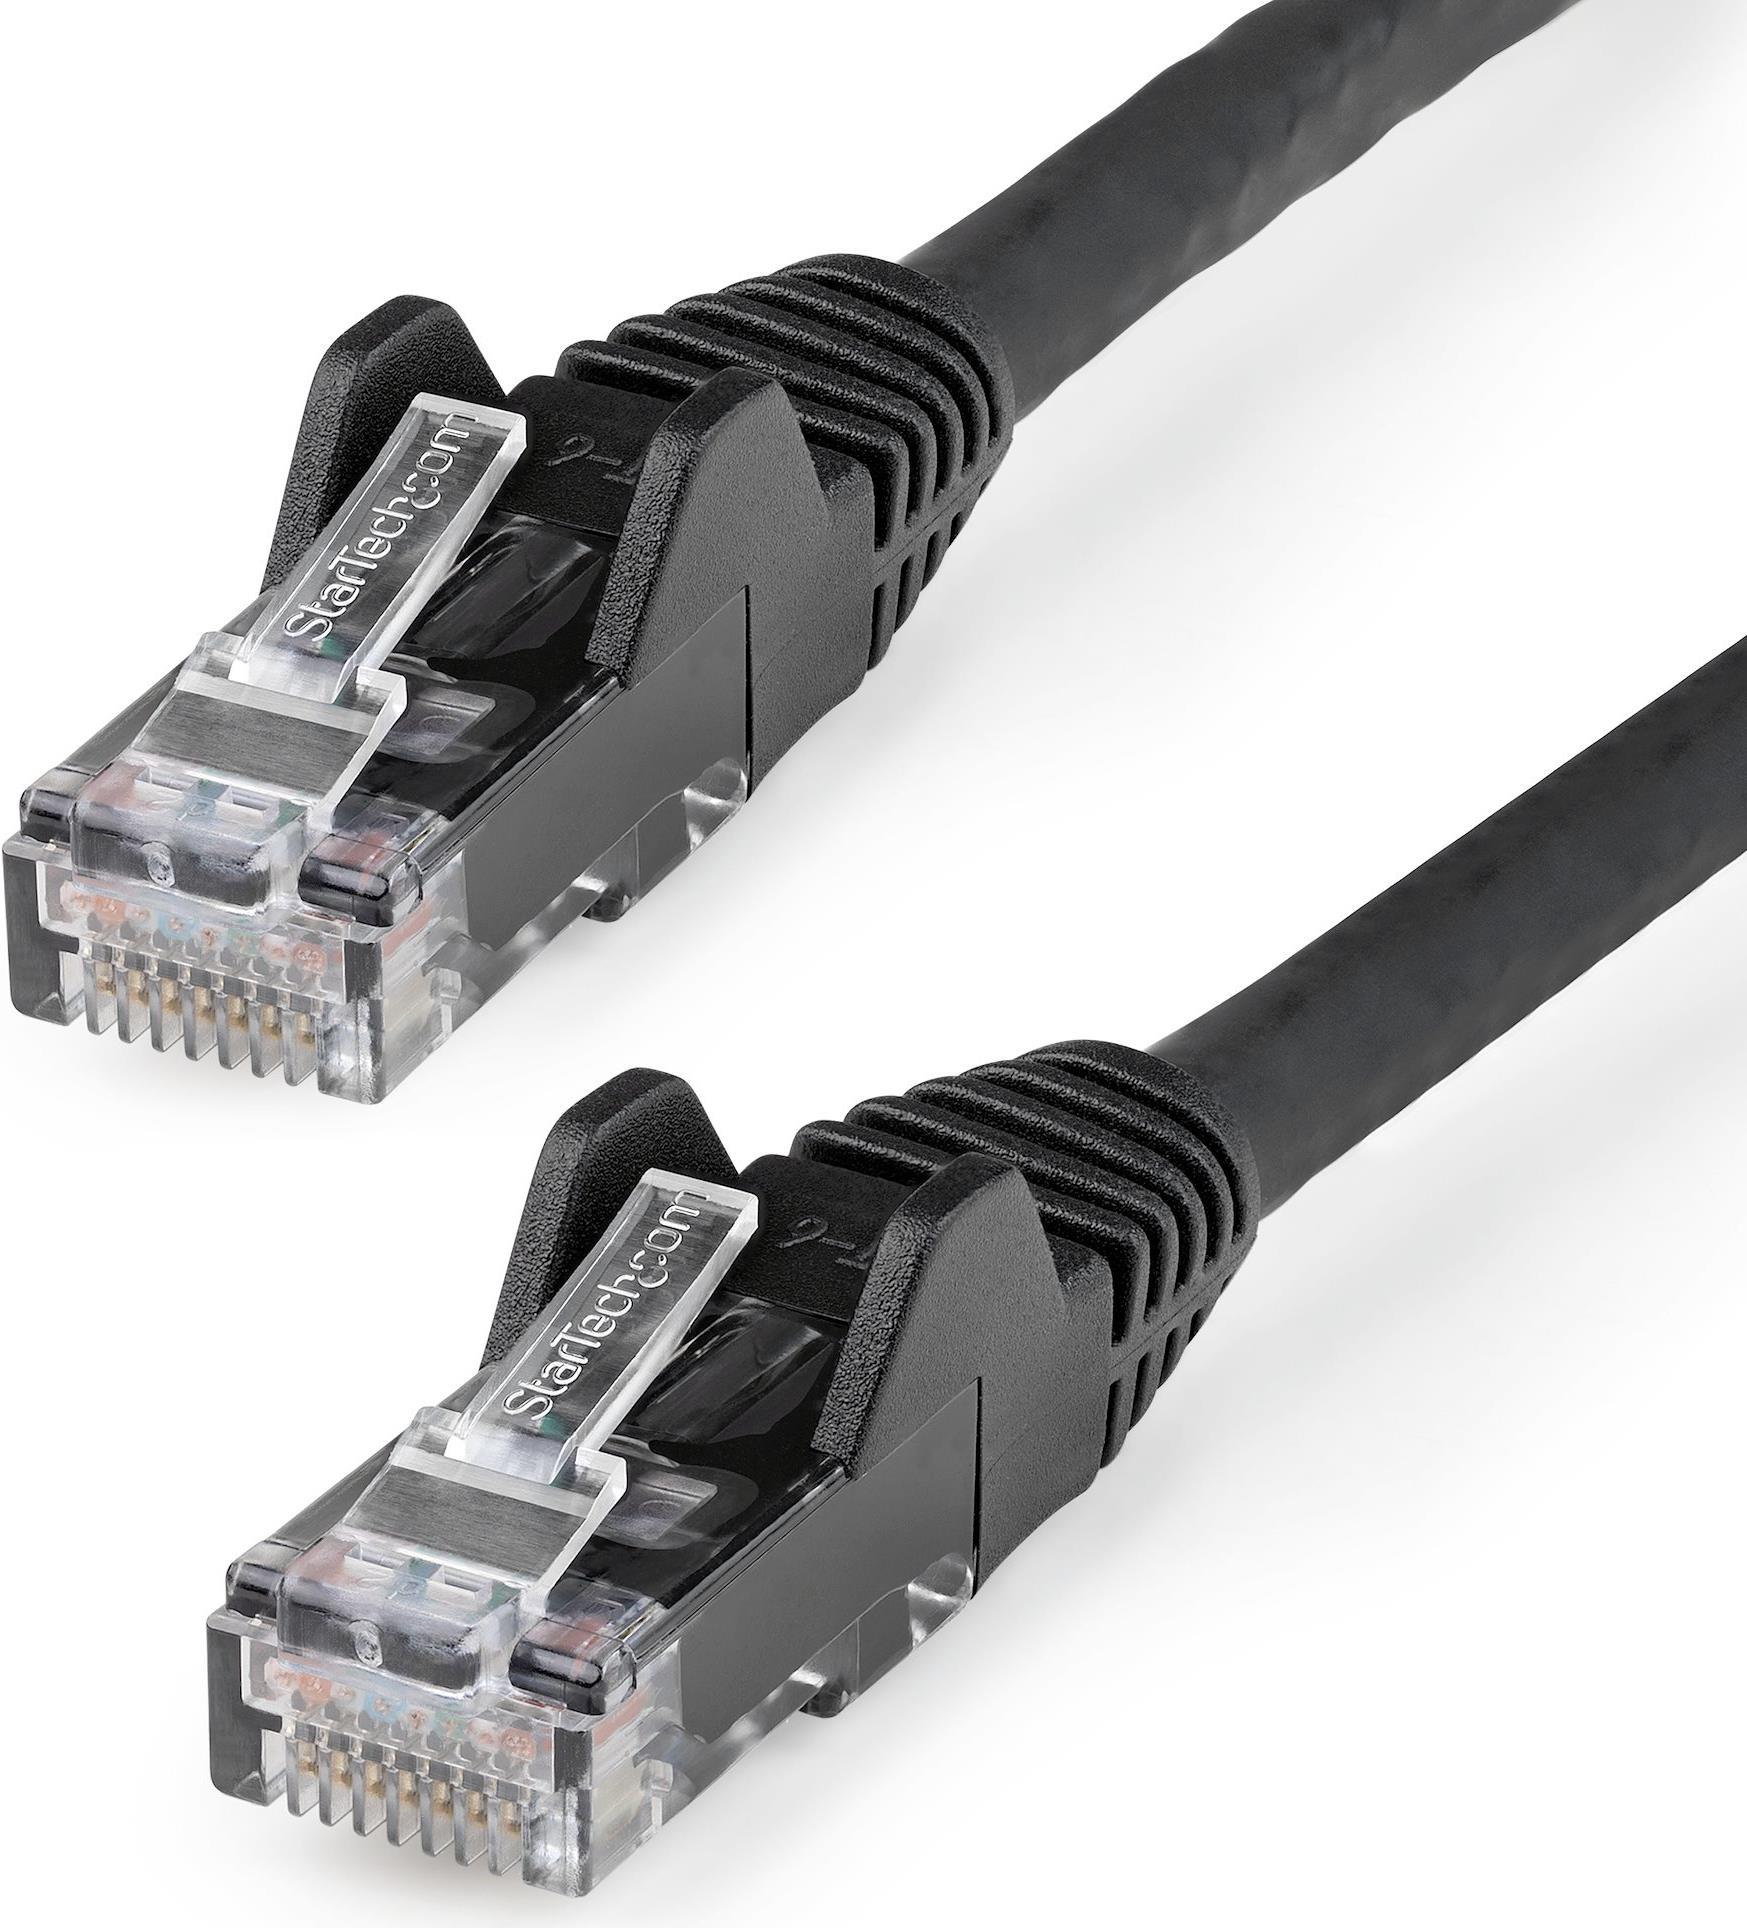 StarTech.com 10m LSZH CAT6 Ethernet Cable, 10 Gigabit Snagless RJ45 100W PoE Network Patch Cord with Strain Relief, CAT 6 10GbE UTP, Black, Individually Tested/ETL, Low Smoke Zero Halogen - Category 6 - 24AWG (N6LPATCH10MBK) - Patch-Kabel - RJ-45 (M) zu RJ-45 (M) - 10 m - 6 mm -